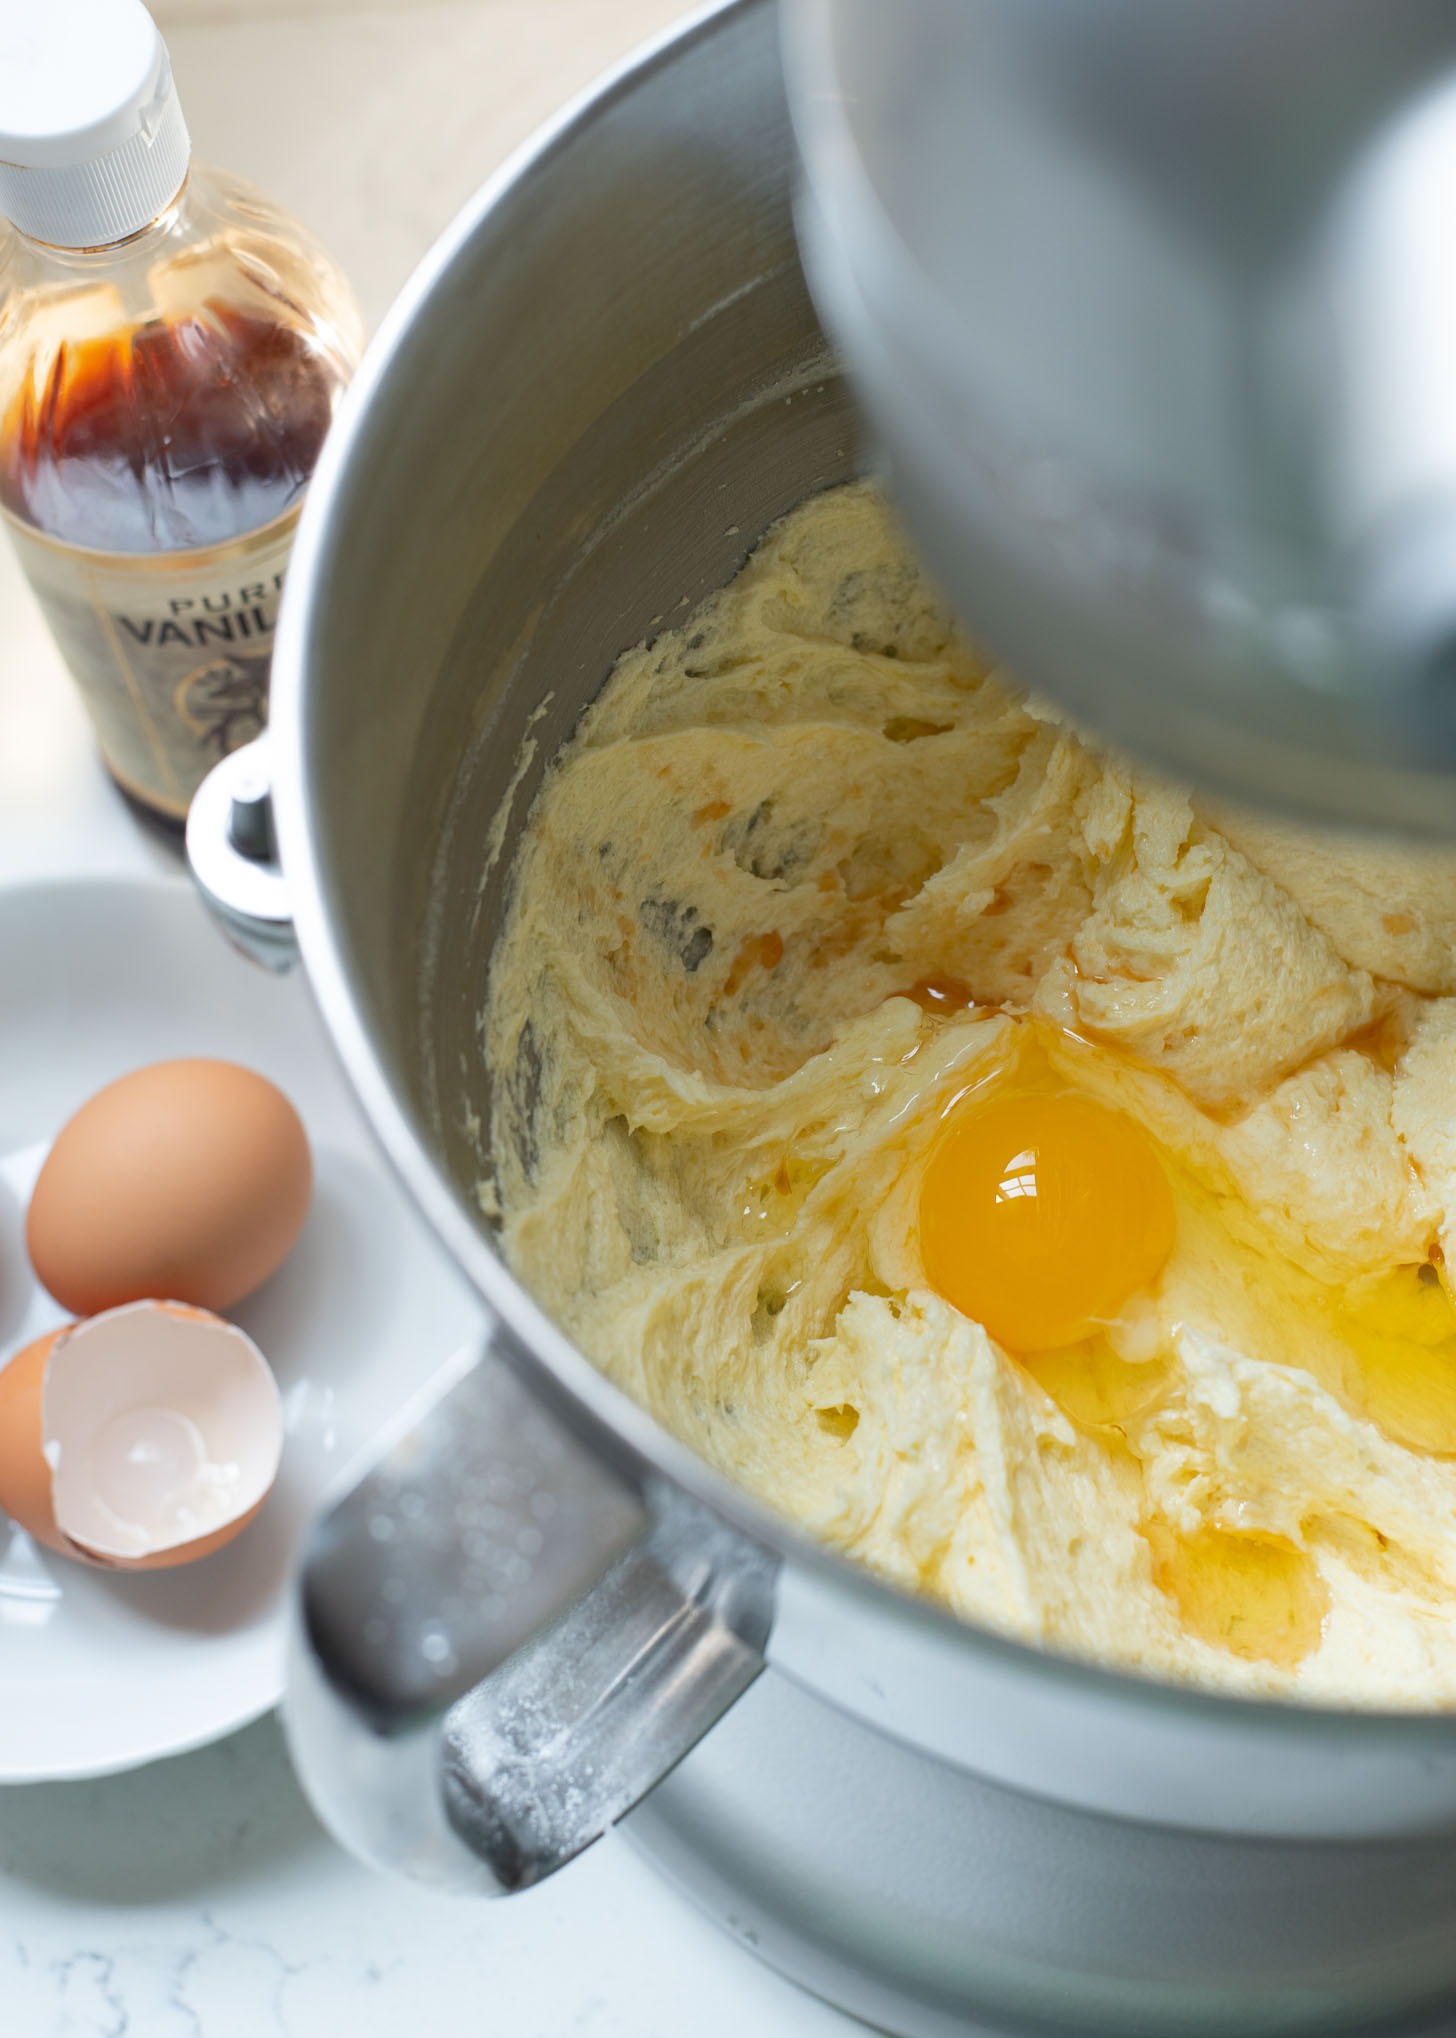 Eggs and vanilla extract are added to butter and sugar mixture in a mixer.